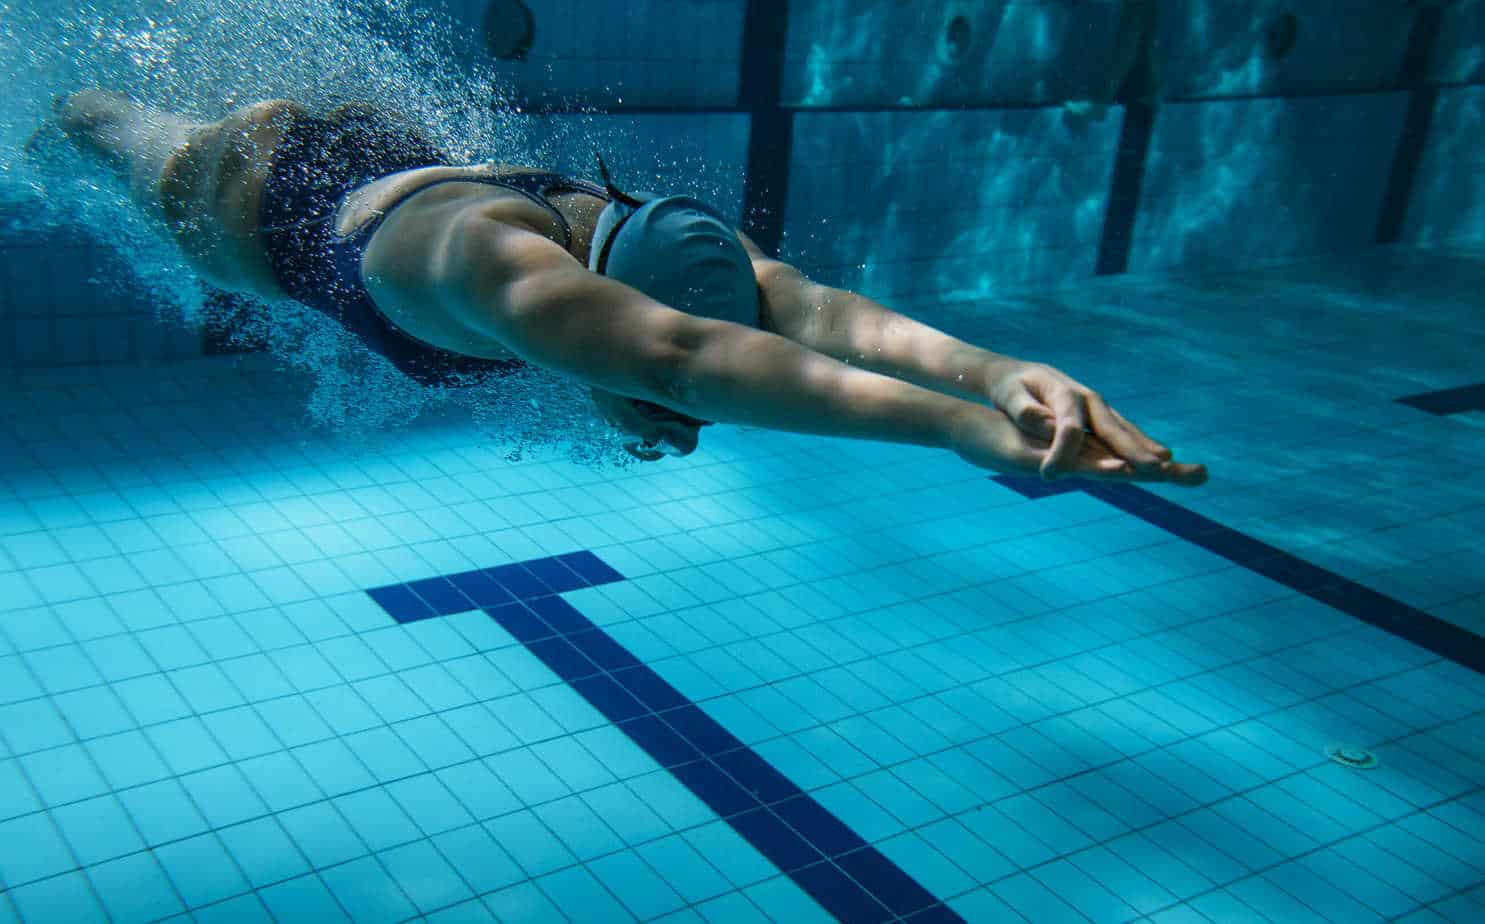 A swimmer dives underwater in a pool, showcasing a streamlined posture with arms outstretched.